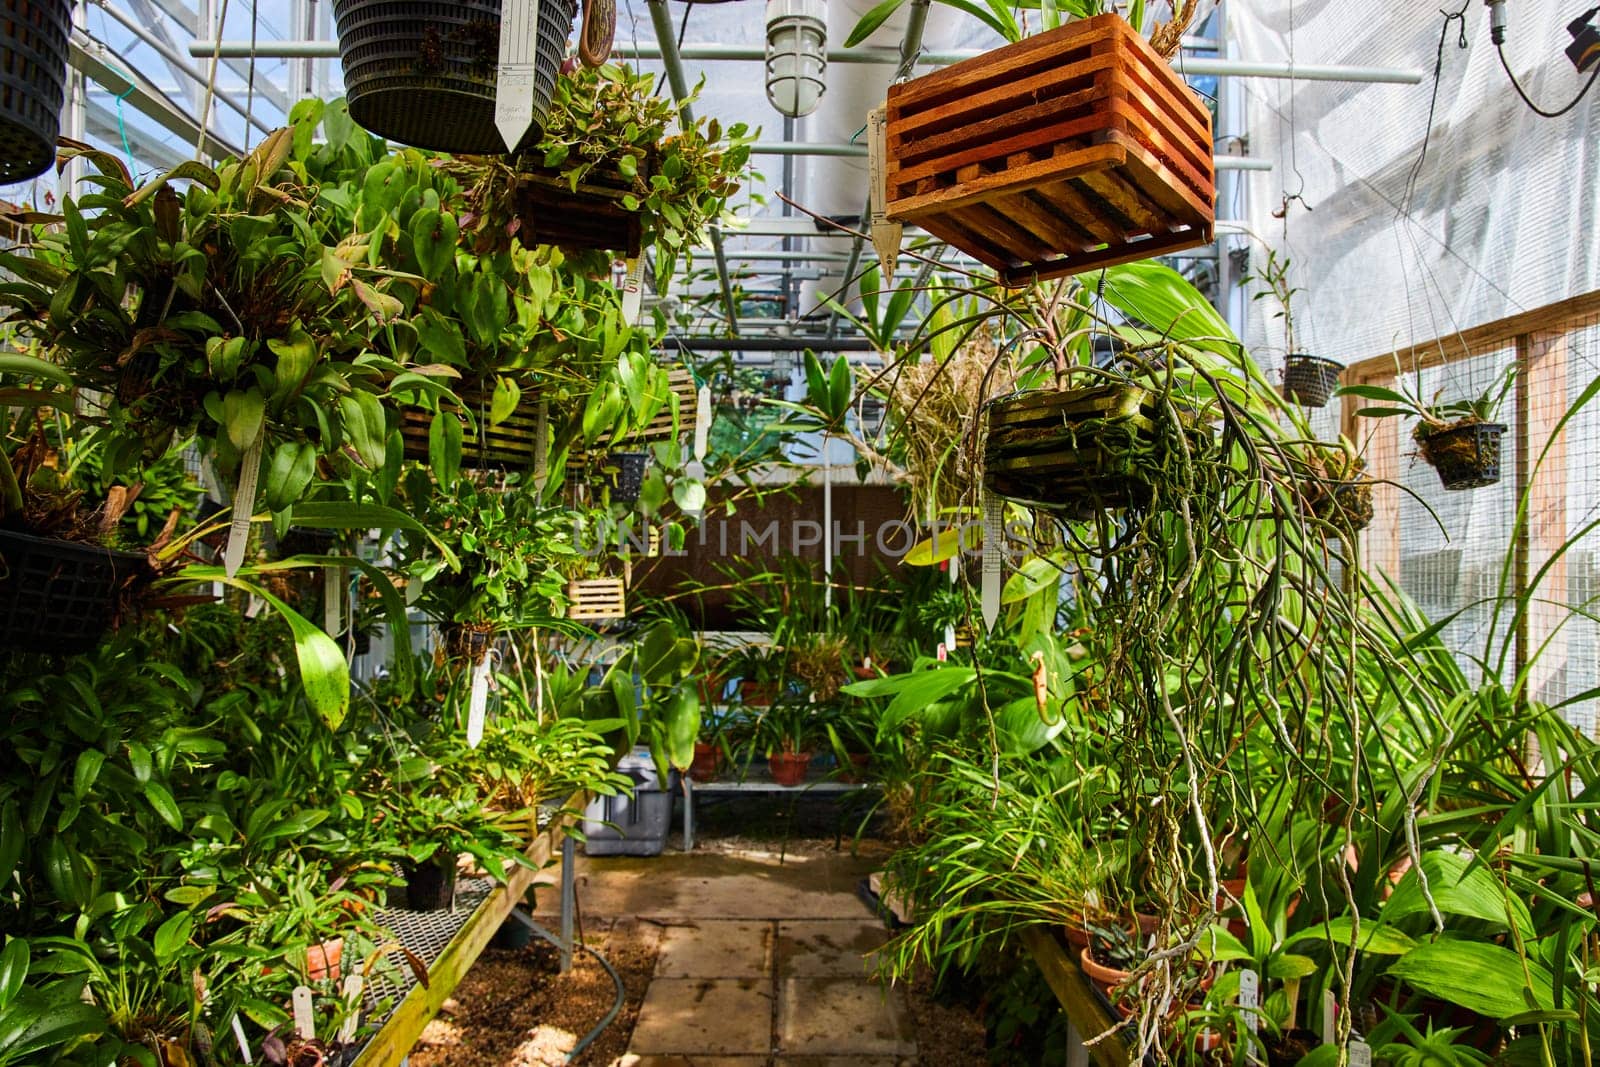 Tropical Greenhouse Oasis with Orchids and Exotic Plants, Muncie Conservatory by njproductions